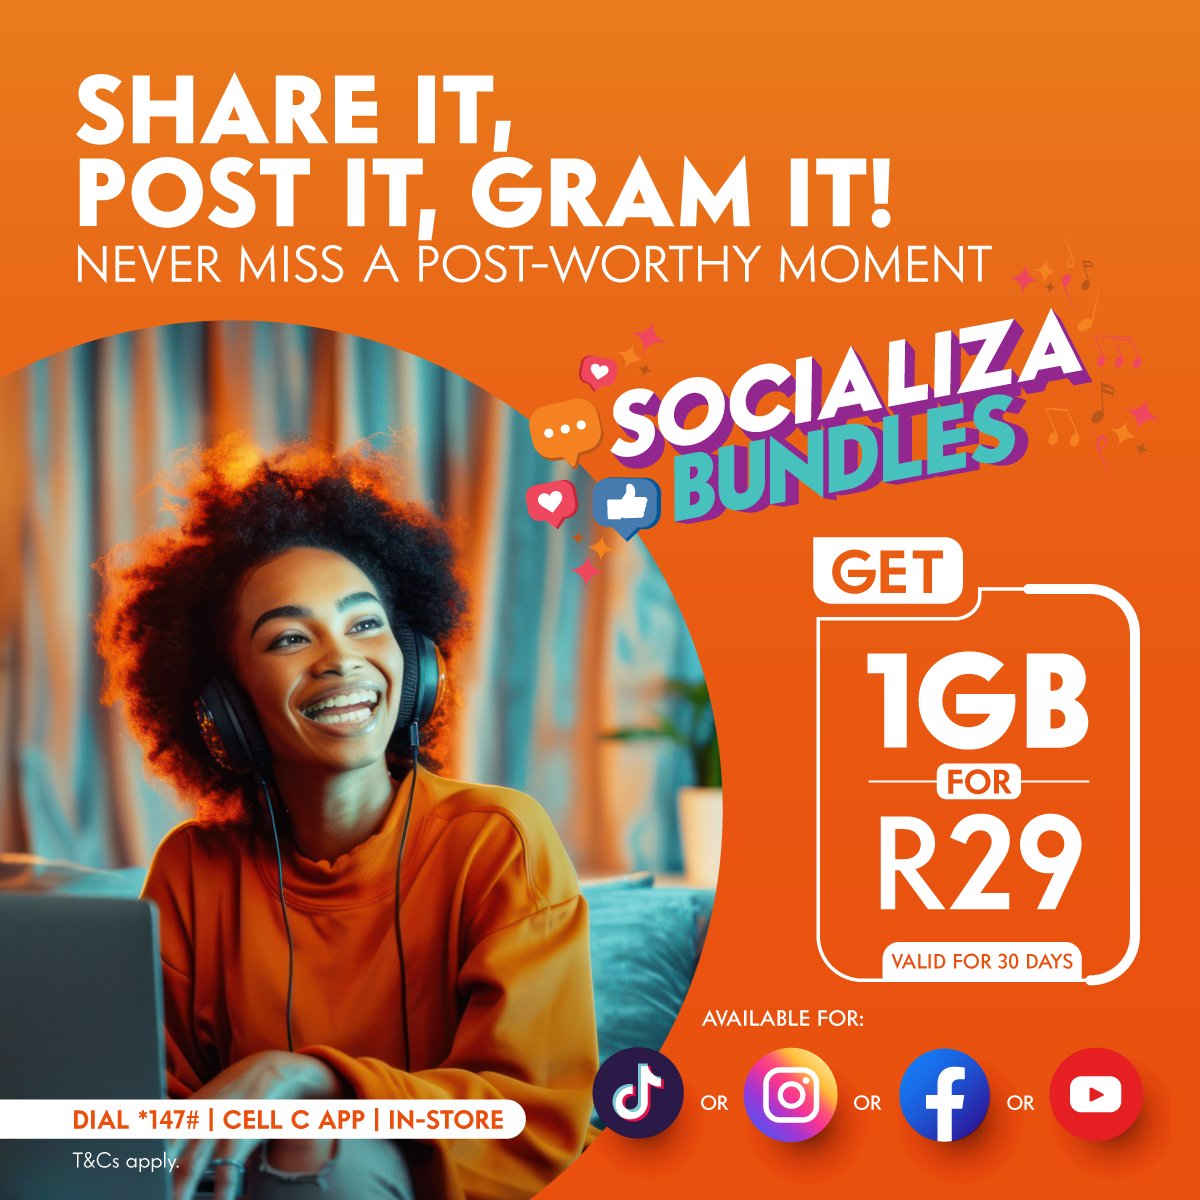 Never miss a notification when on the X streets! Cell C’s Socializa Bundles is the one! Get 1GB for X for R29 and #ChangeYourWorld today! T&Cs apply. 🧡